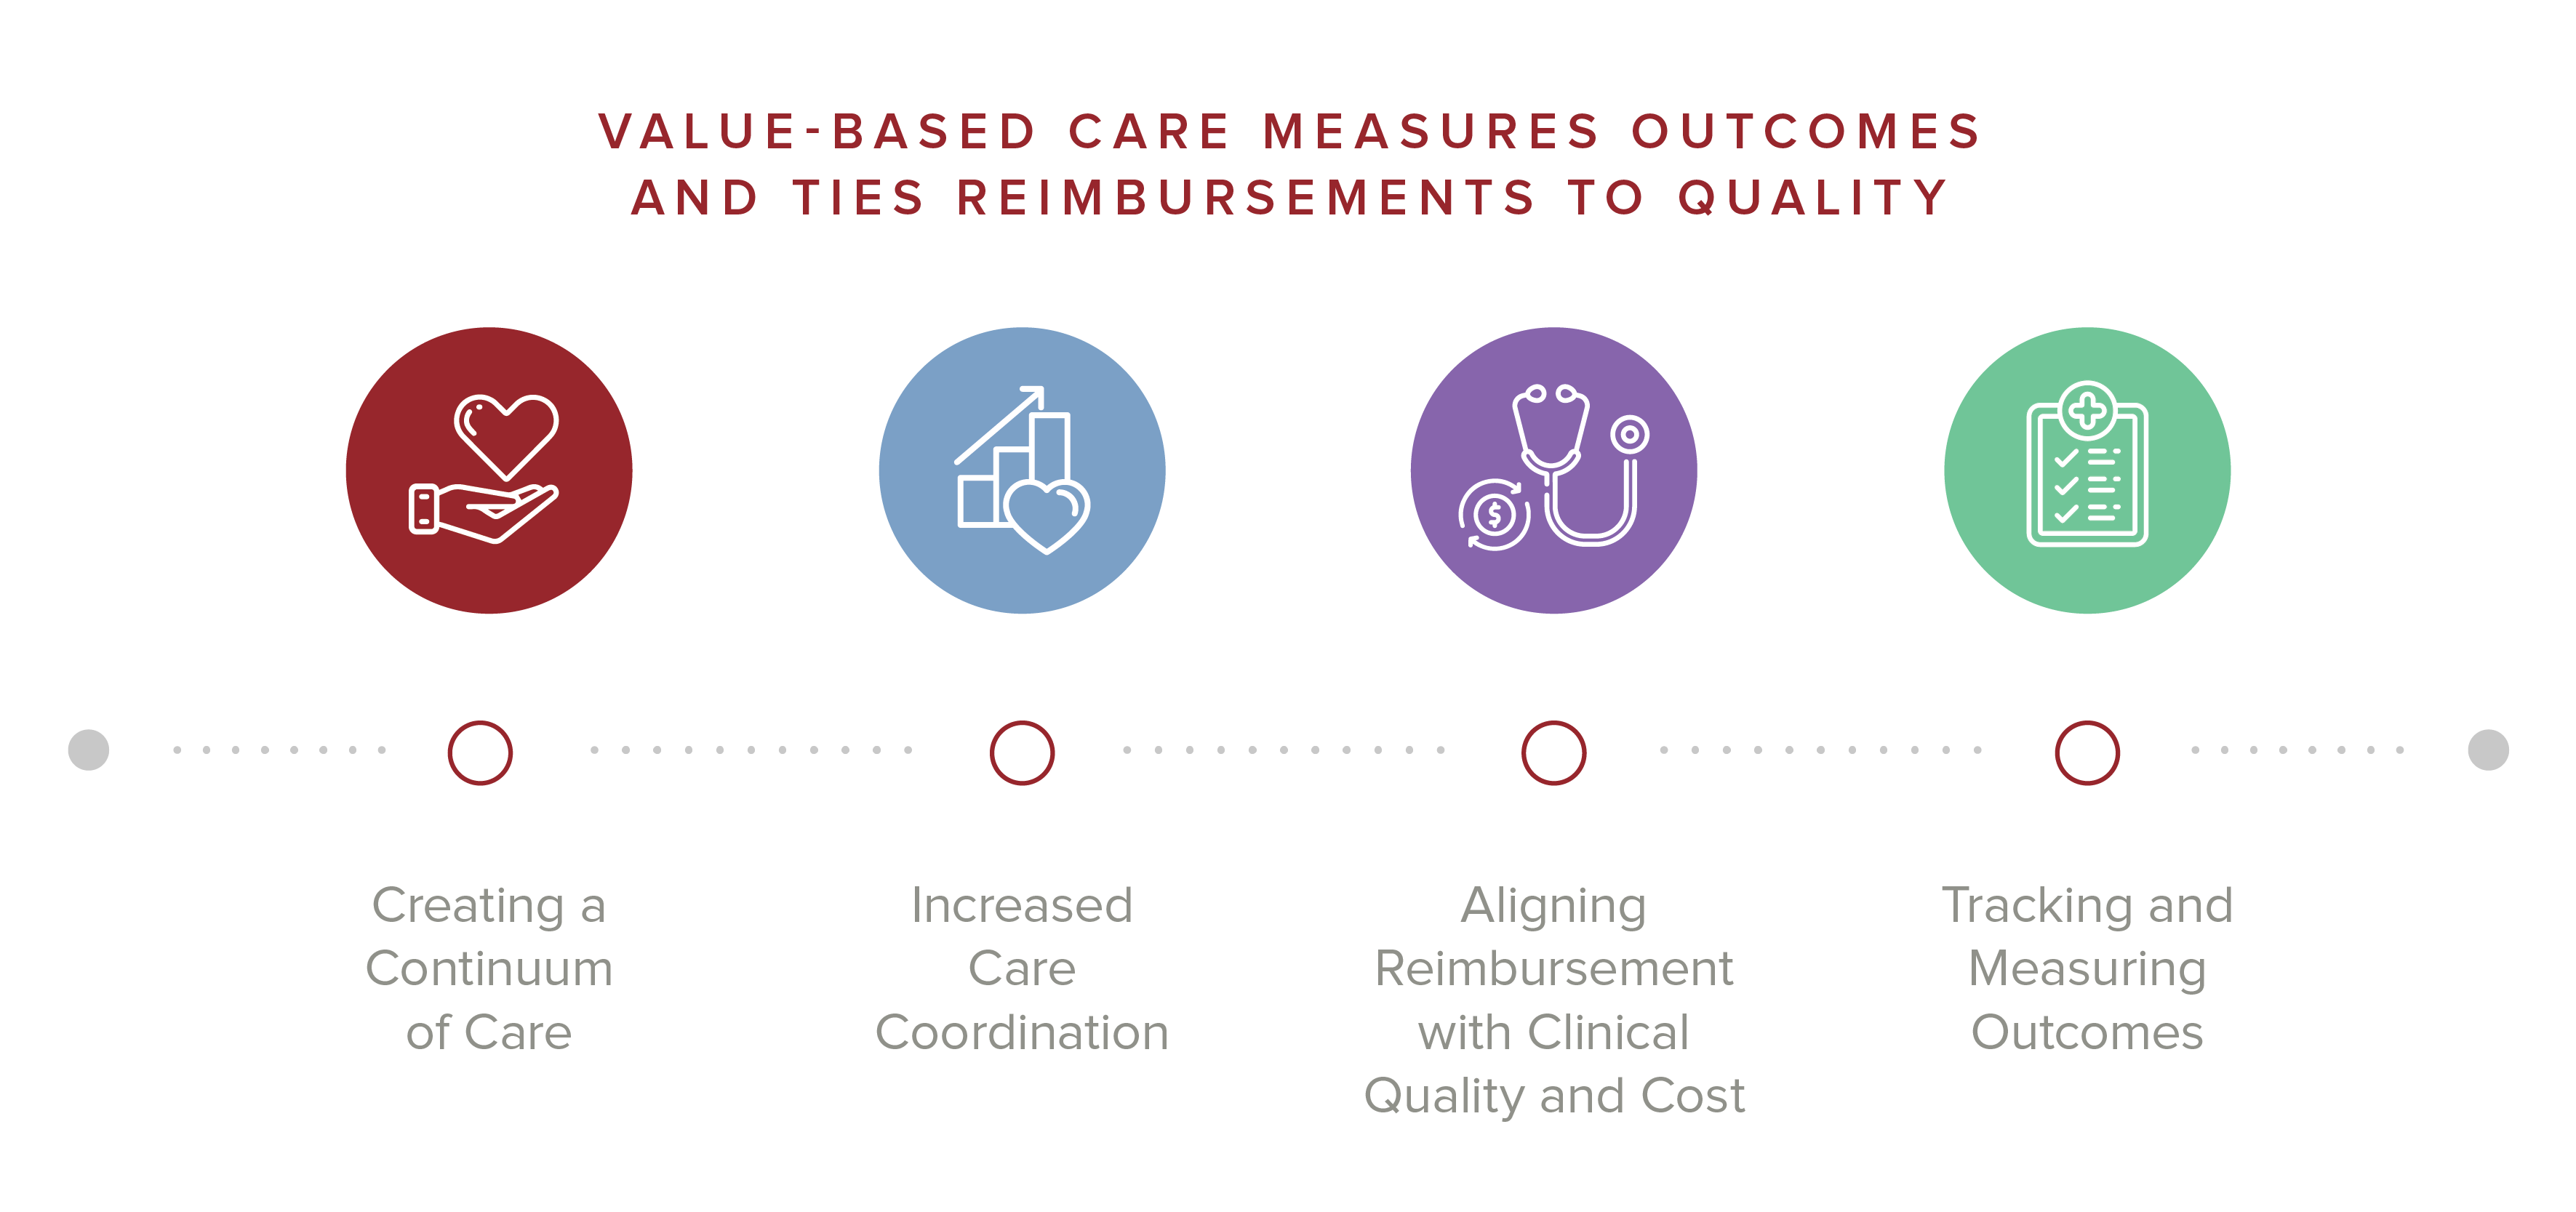 Post-Acute Care: Five Key Traits of Growth-Ready Providers